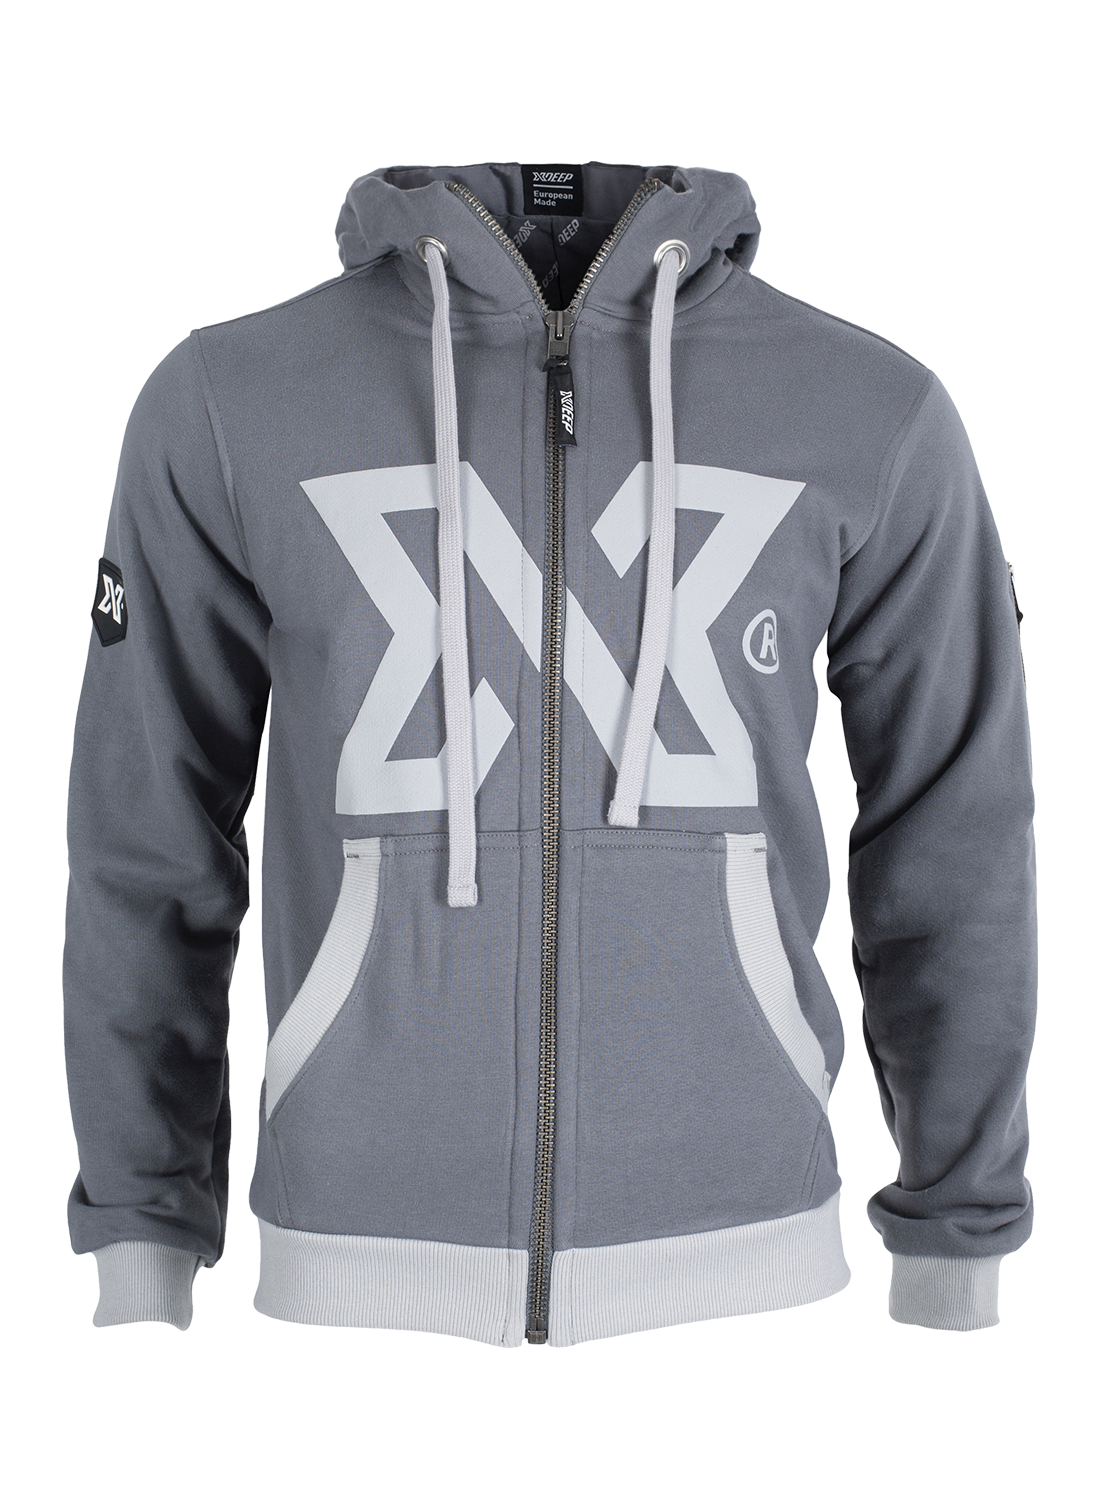 XDEEP XDEEP Grey Signature Hoodie Small - Oyster Diving